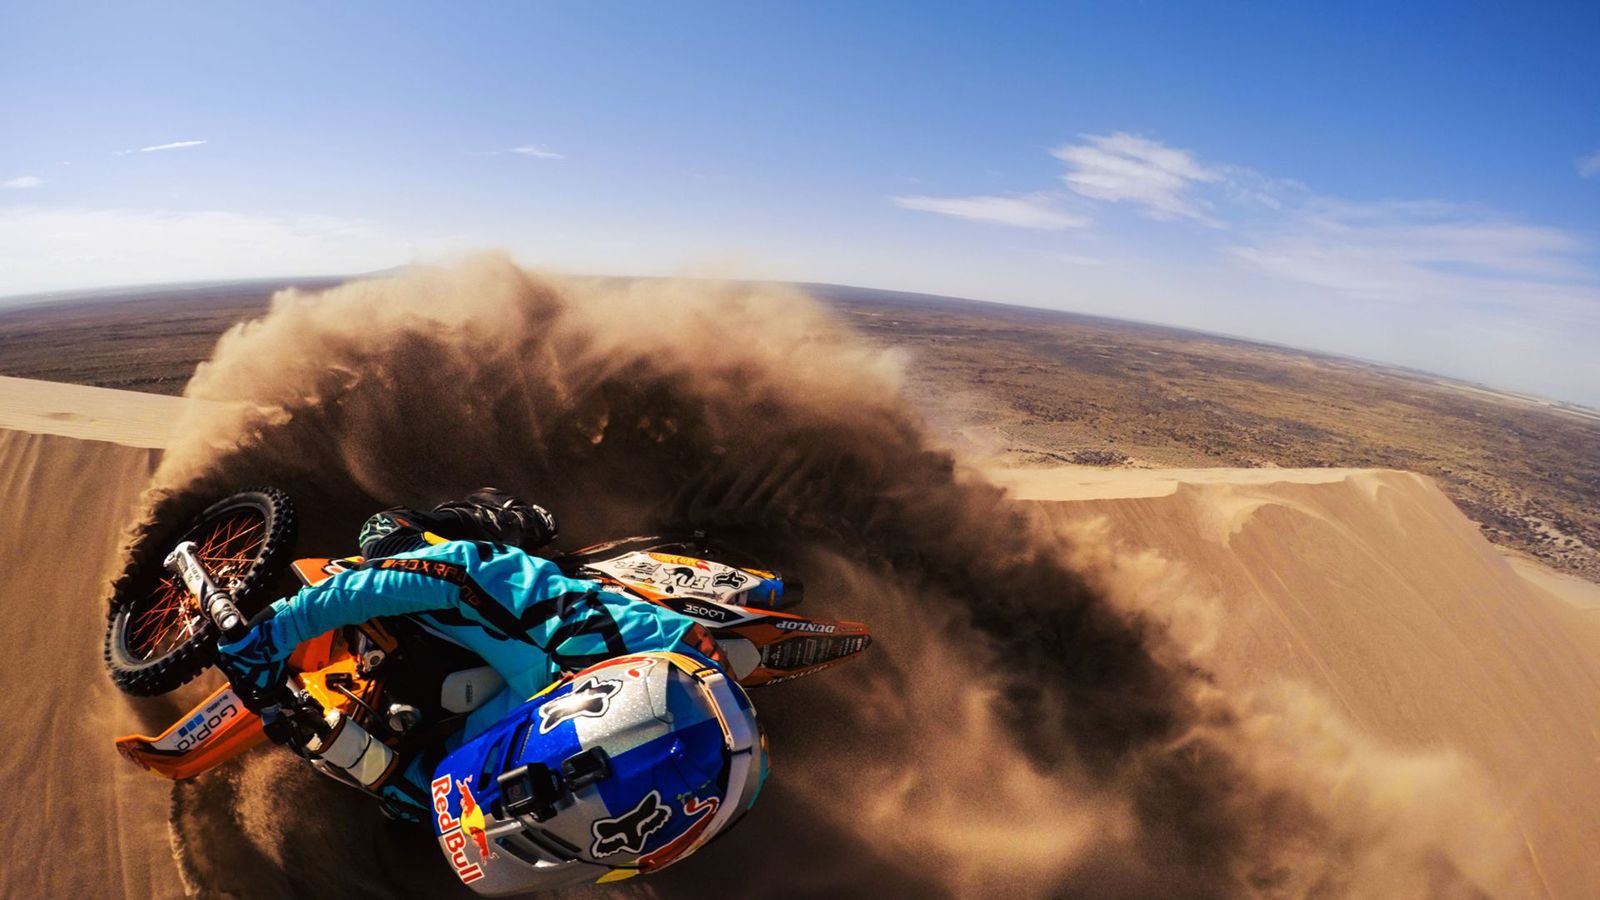 the best gopro photos in the world prepare to lose your breath image 42